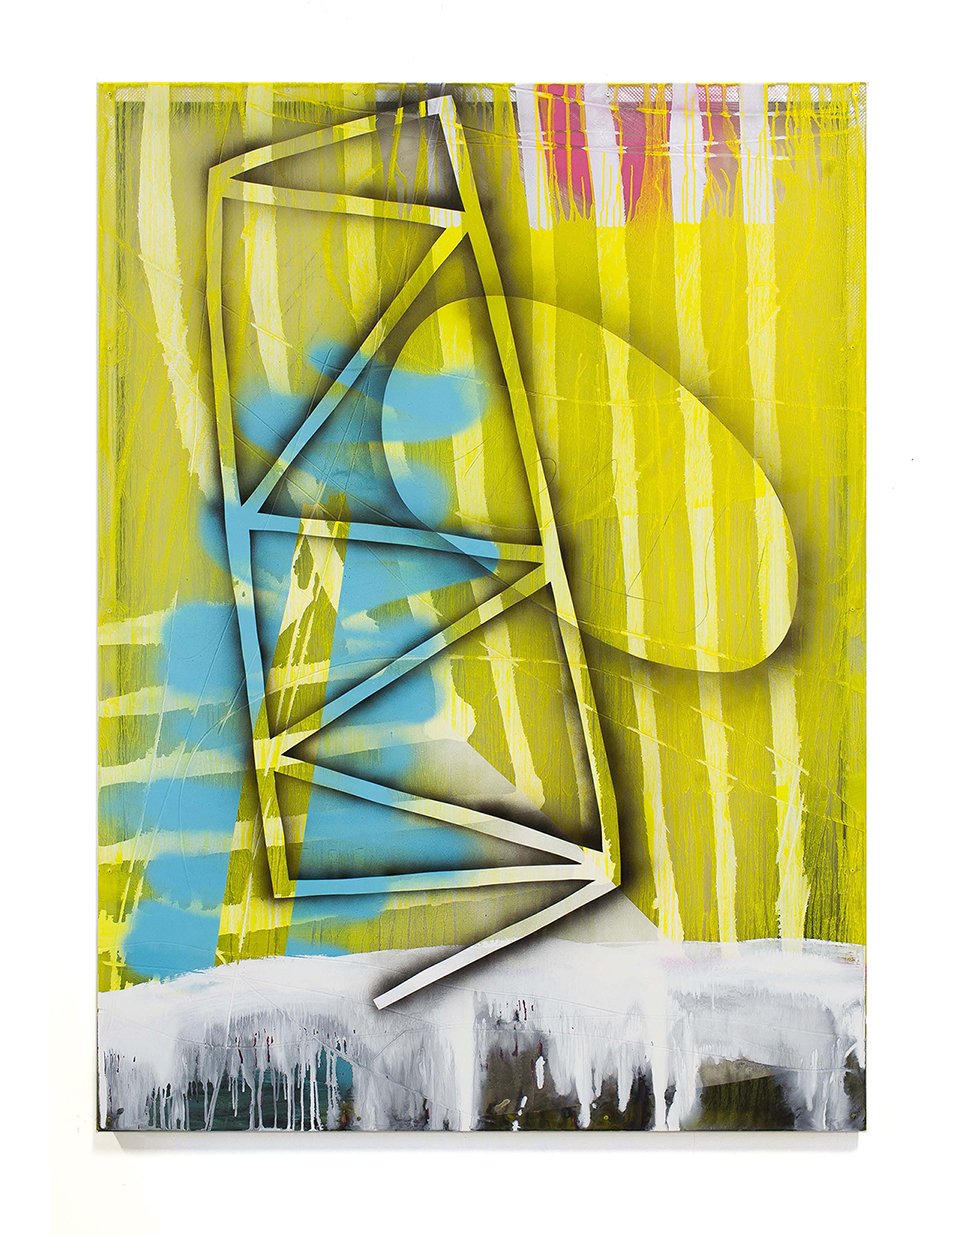  Joe Fleming, Yellow Gate, 60” x 44”, enamel on polycarbonate with aluminum substrate, 2016 